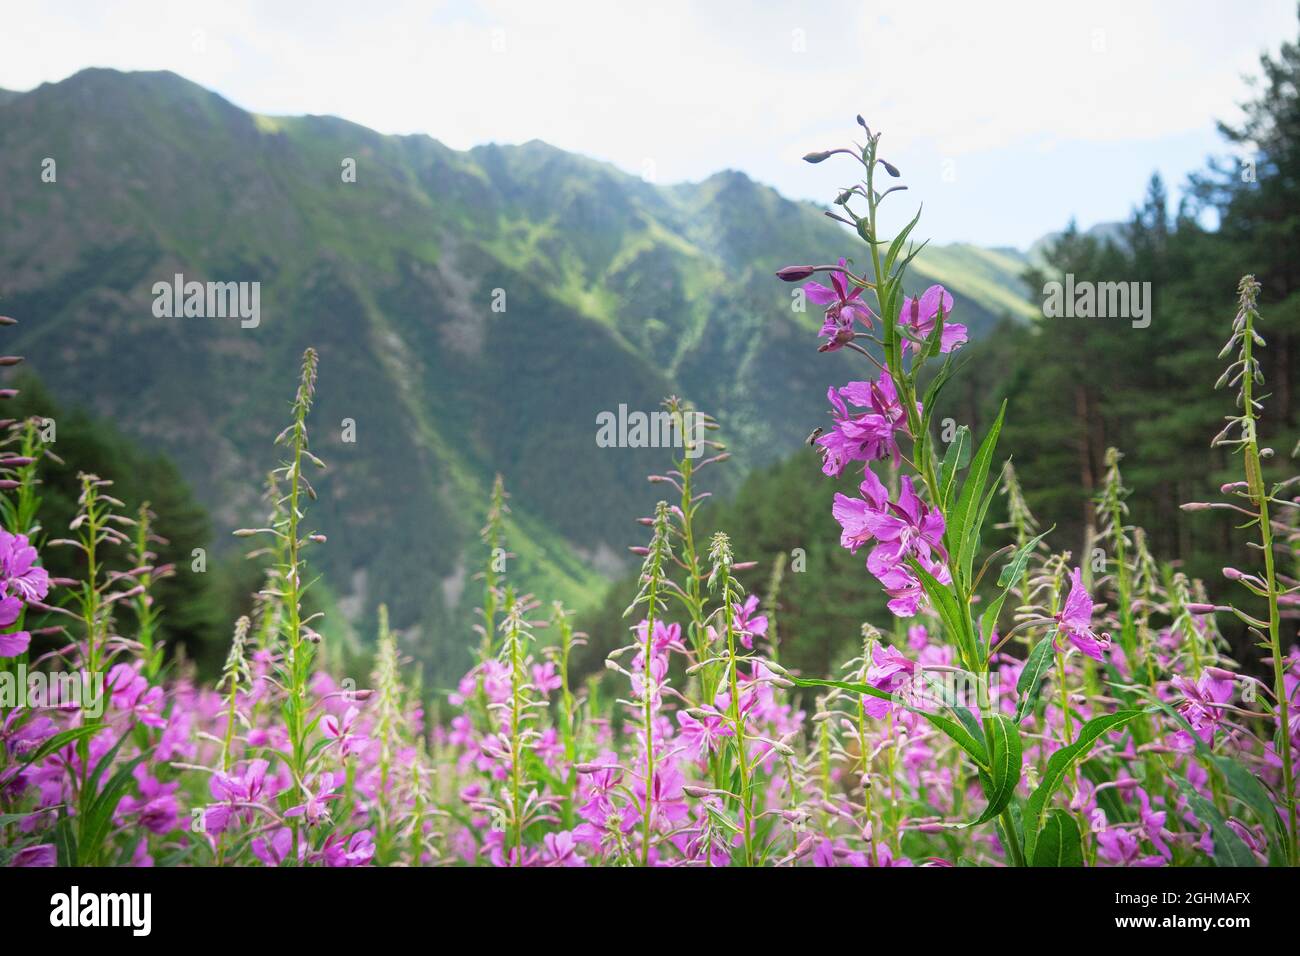 Rosebay willowherb (Chamaenerion colchicum) in the valleys of the Greater Caucasus. Lush fragrant summer mountain meadows. Against the backdrop of a m Stock Photo